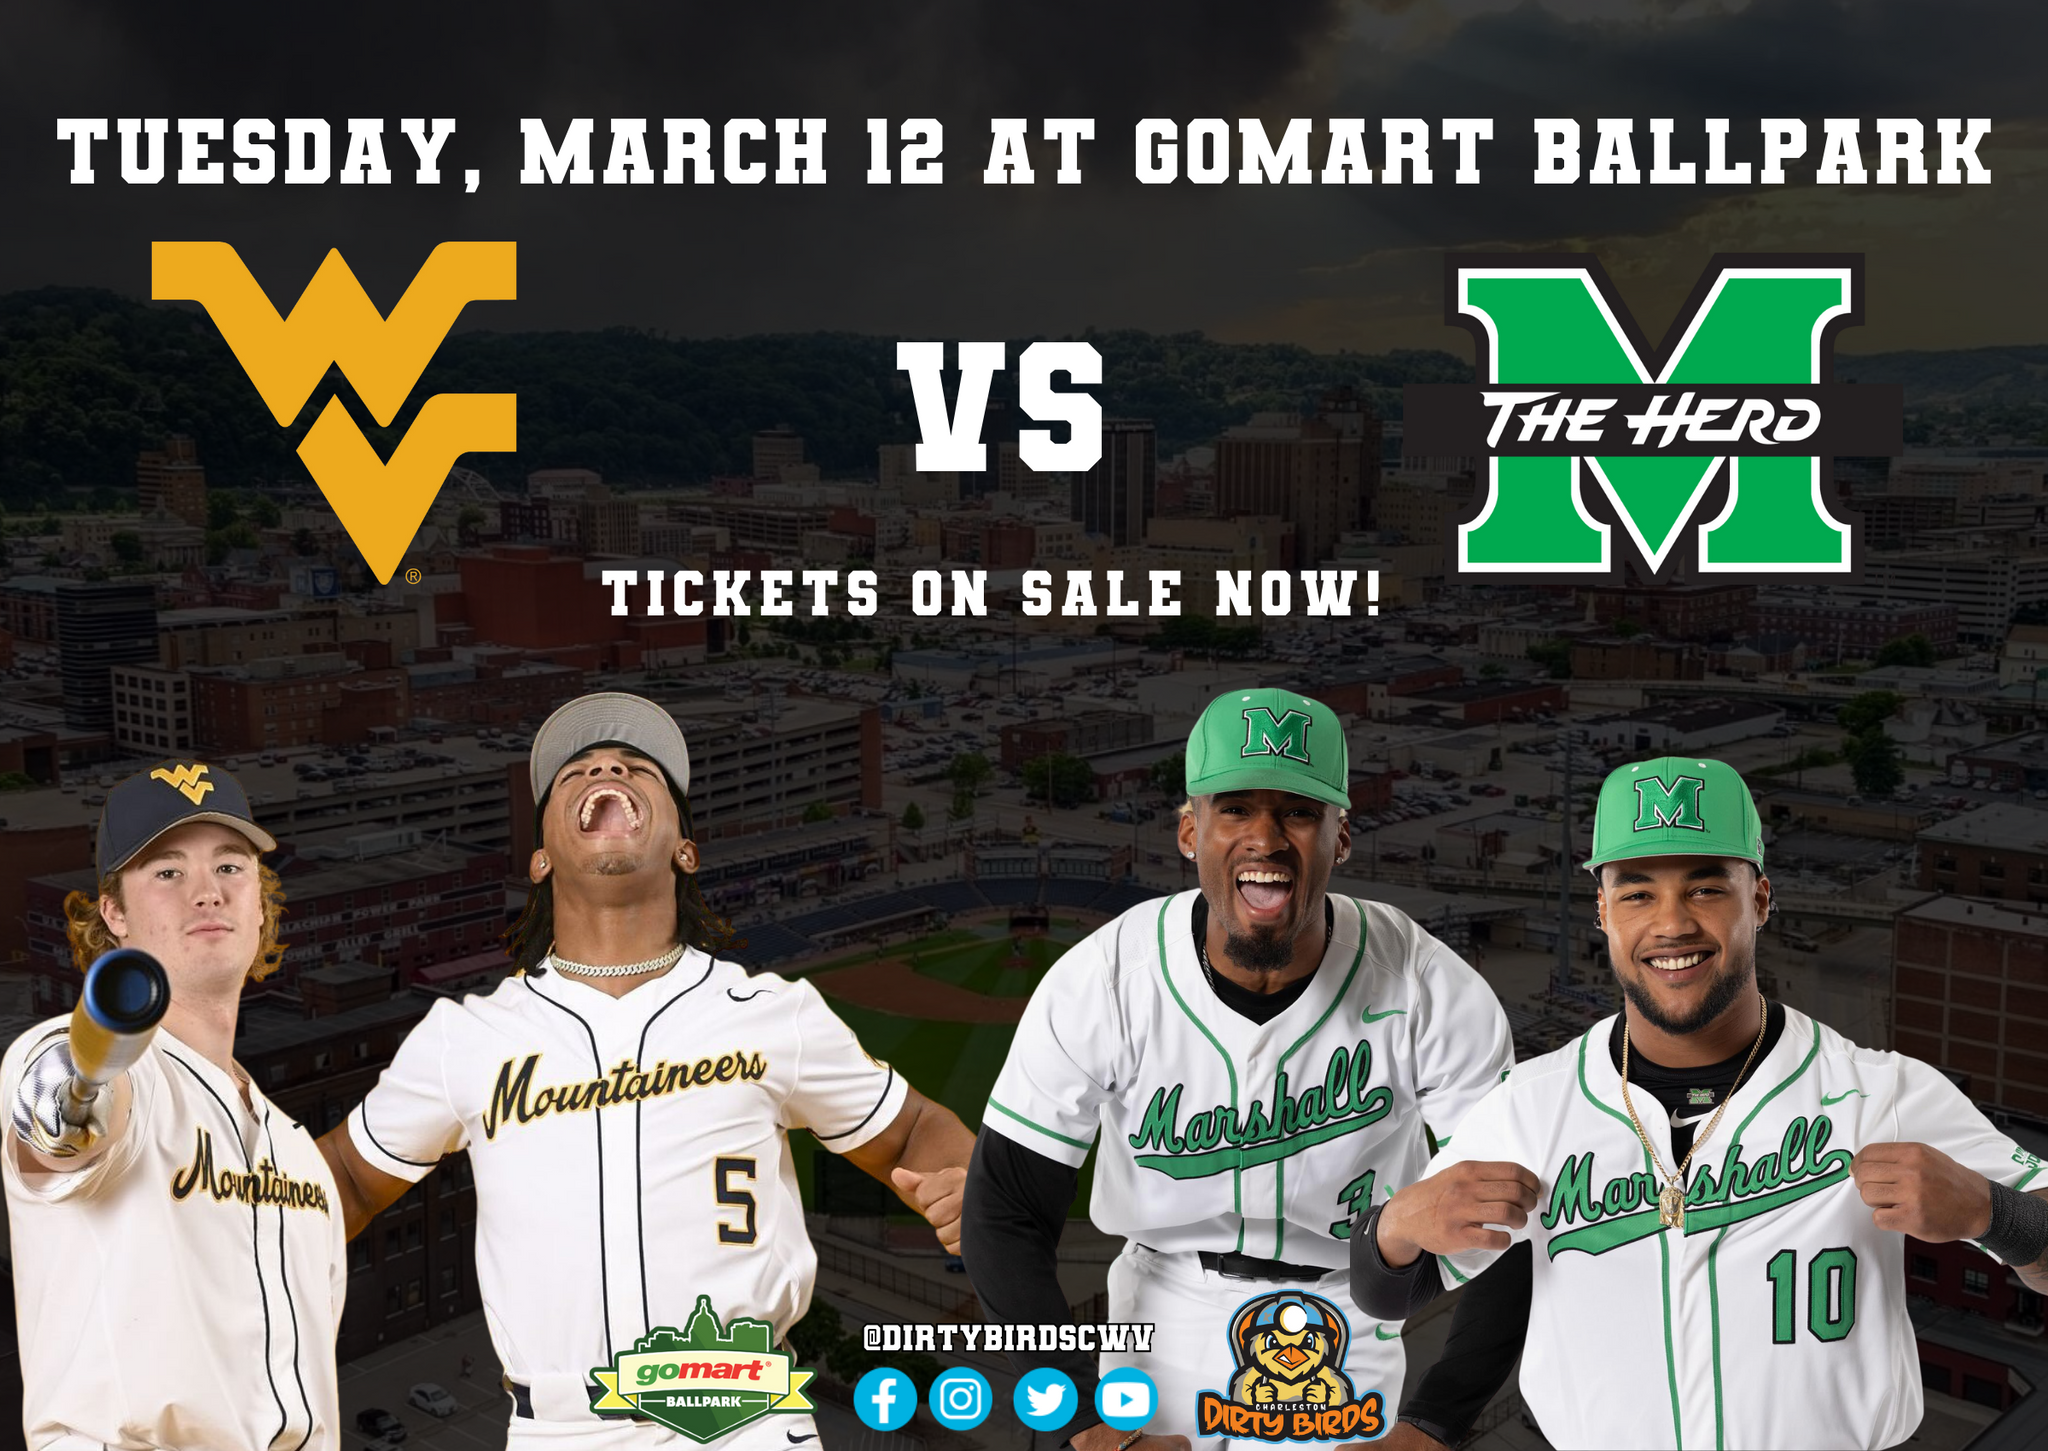 DIRTY BIRDS TO HOST MARSHALL VS. WVU GAME ON MARCH 12